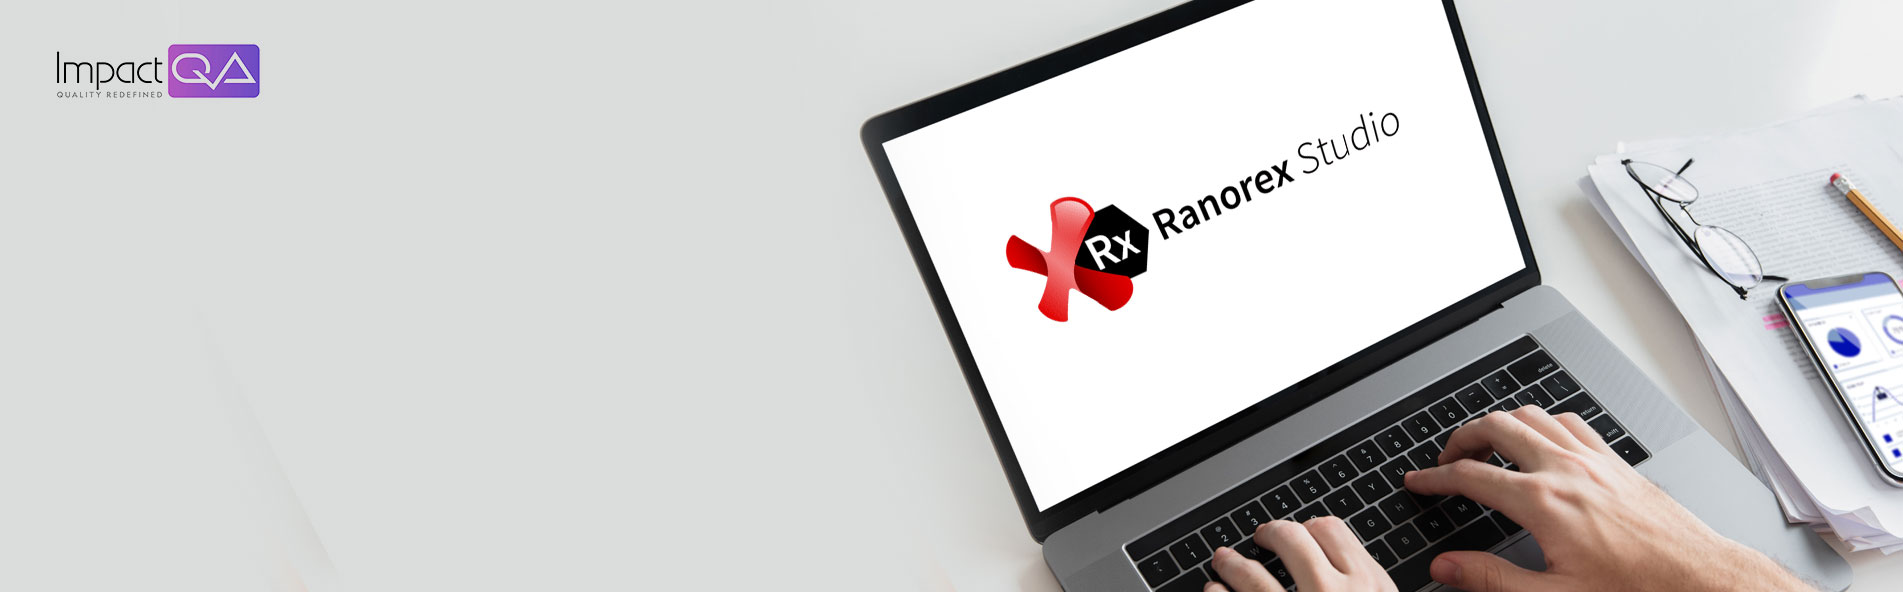 Ranorex: Pros & Cons of GUI Test Automation Tools